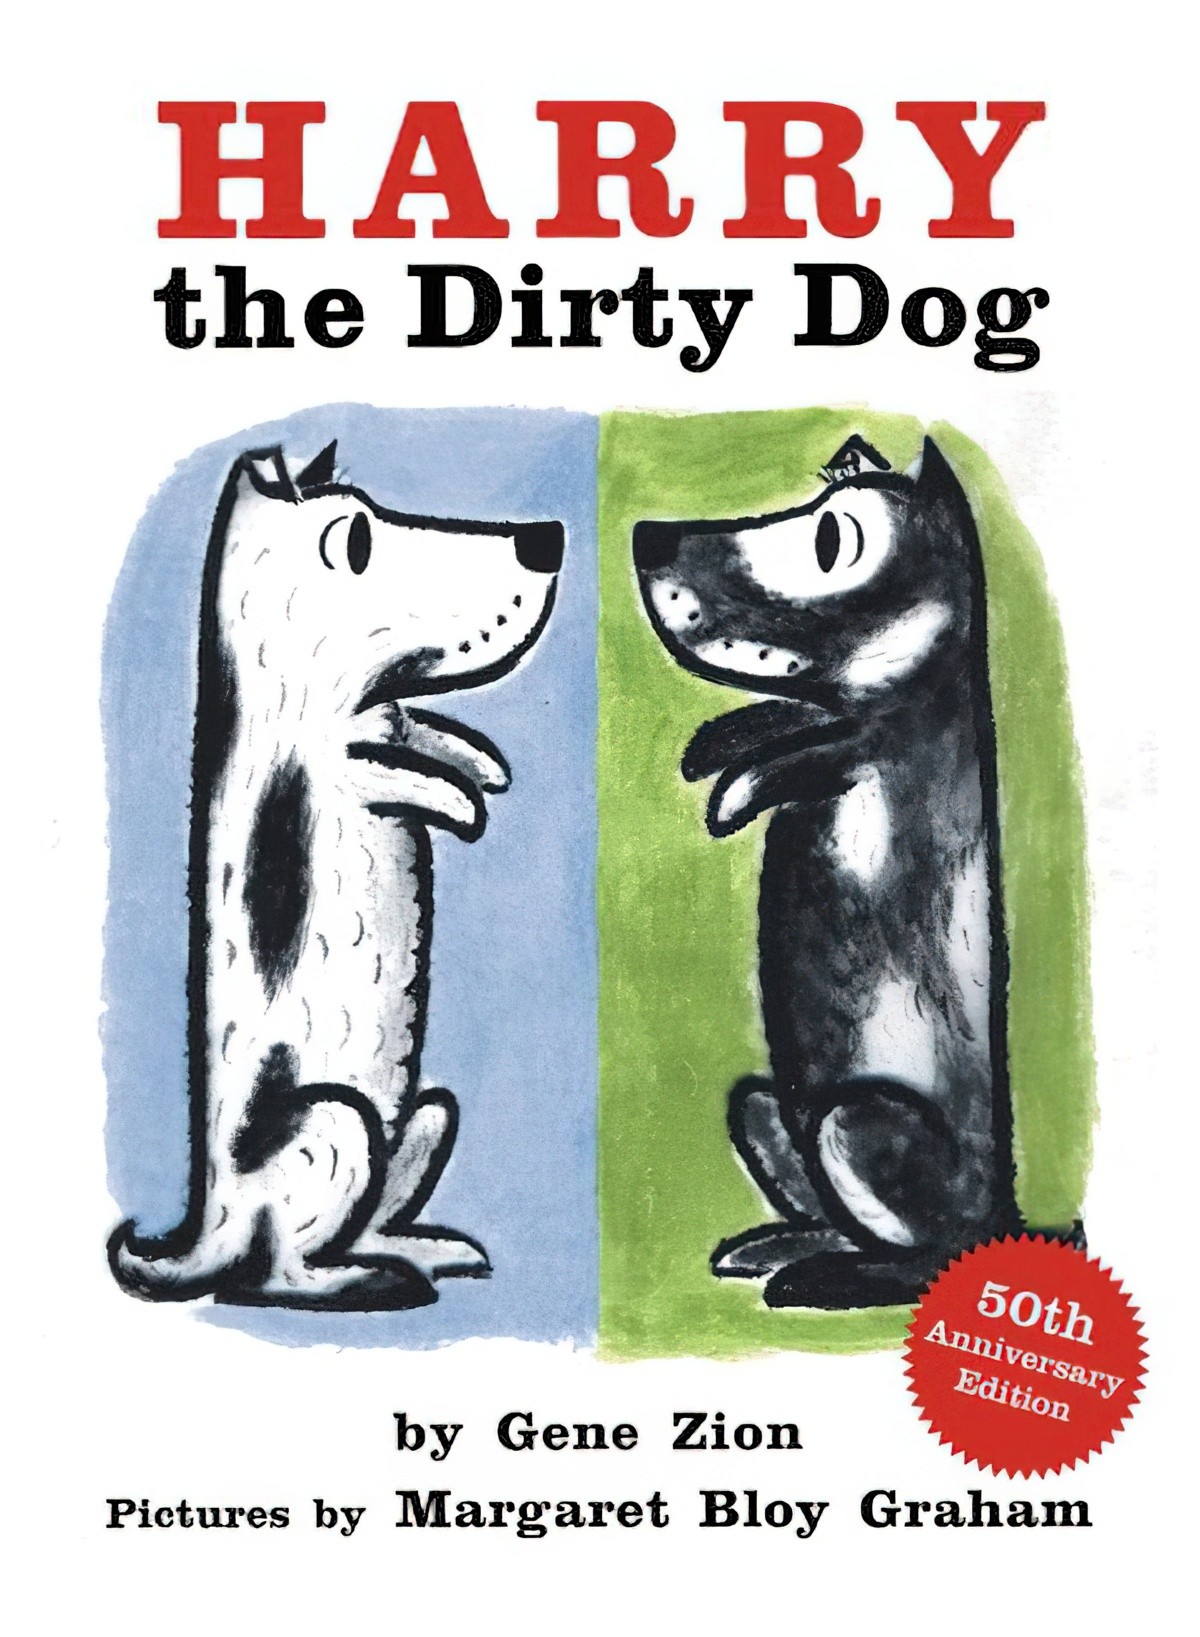 Harry The Dirty Dog by Gene Zion and Margaret Bloy Graham Analysis